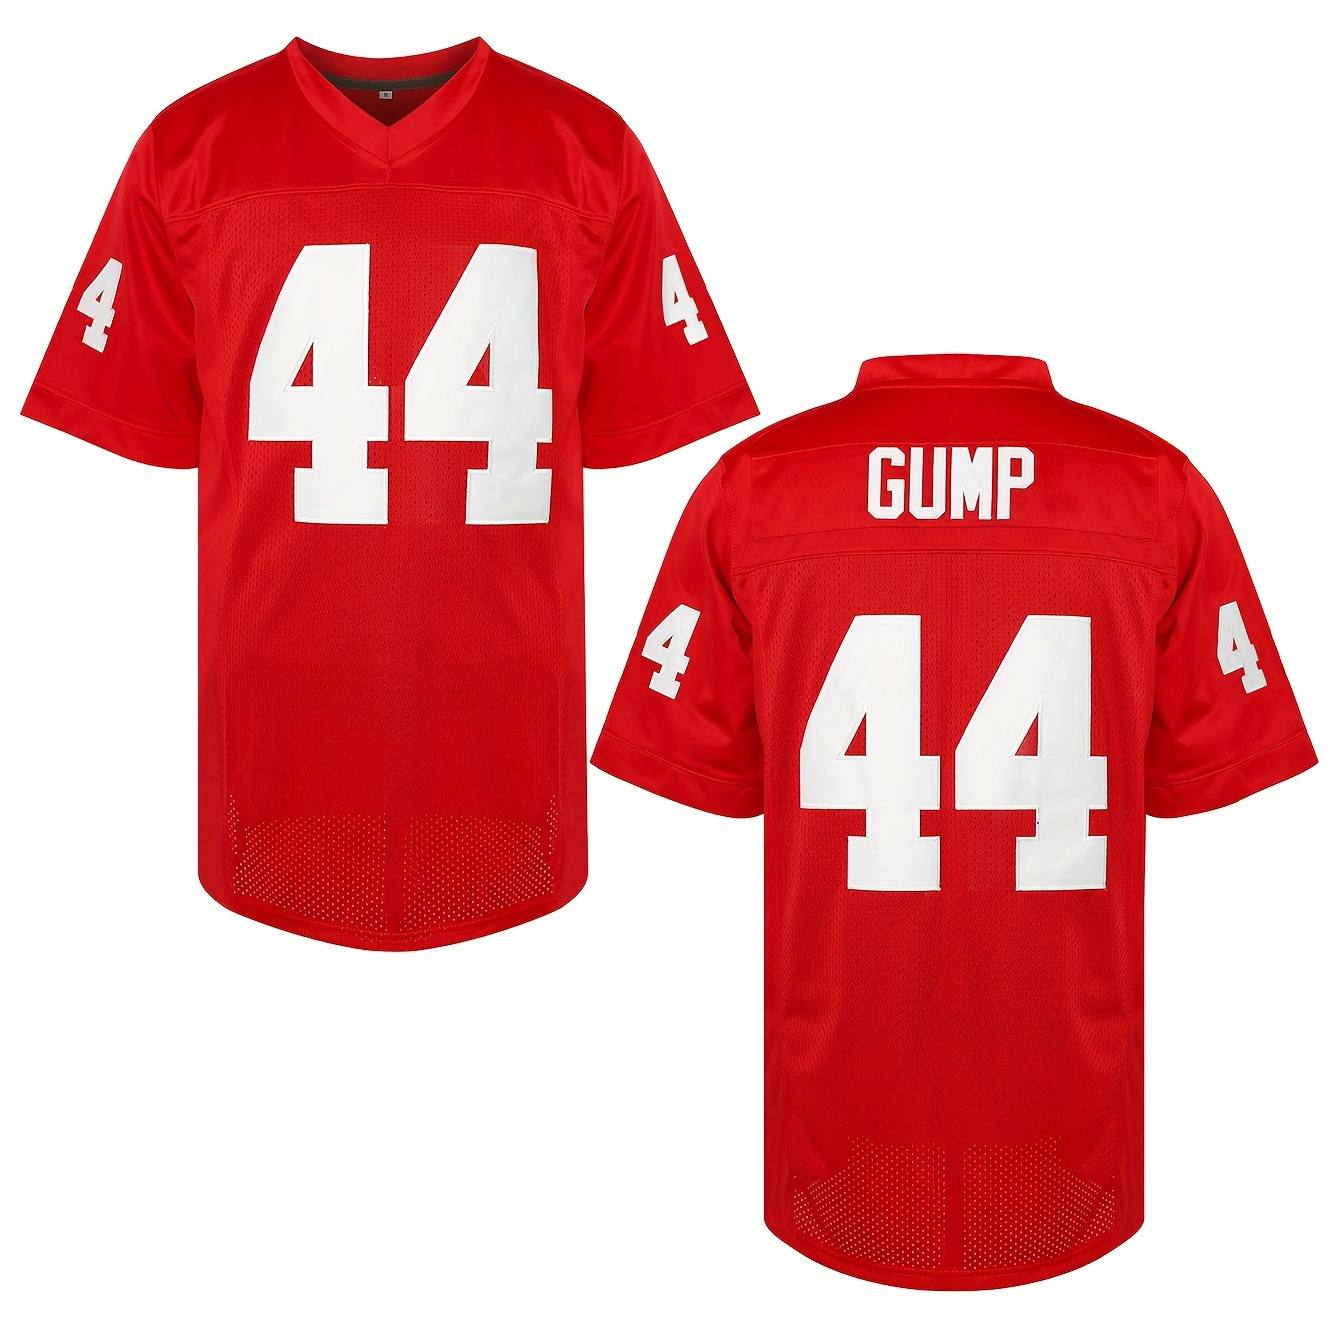 

Football Jersey 44 Red Stitched Name Number Men's Sports Shirt Polyester Movie Jersey S-3xl